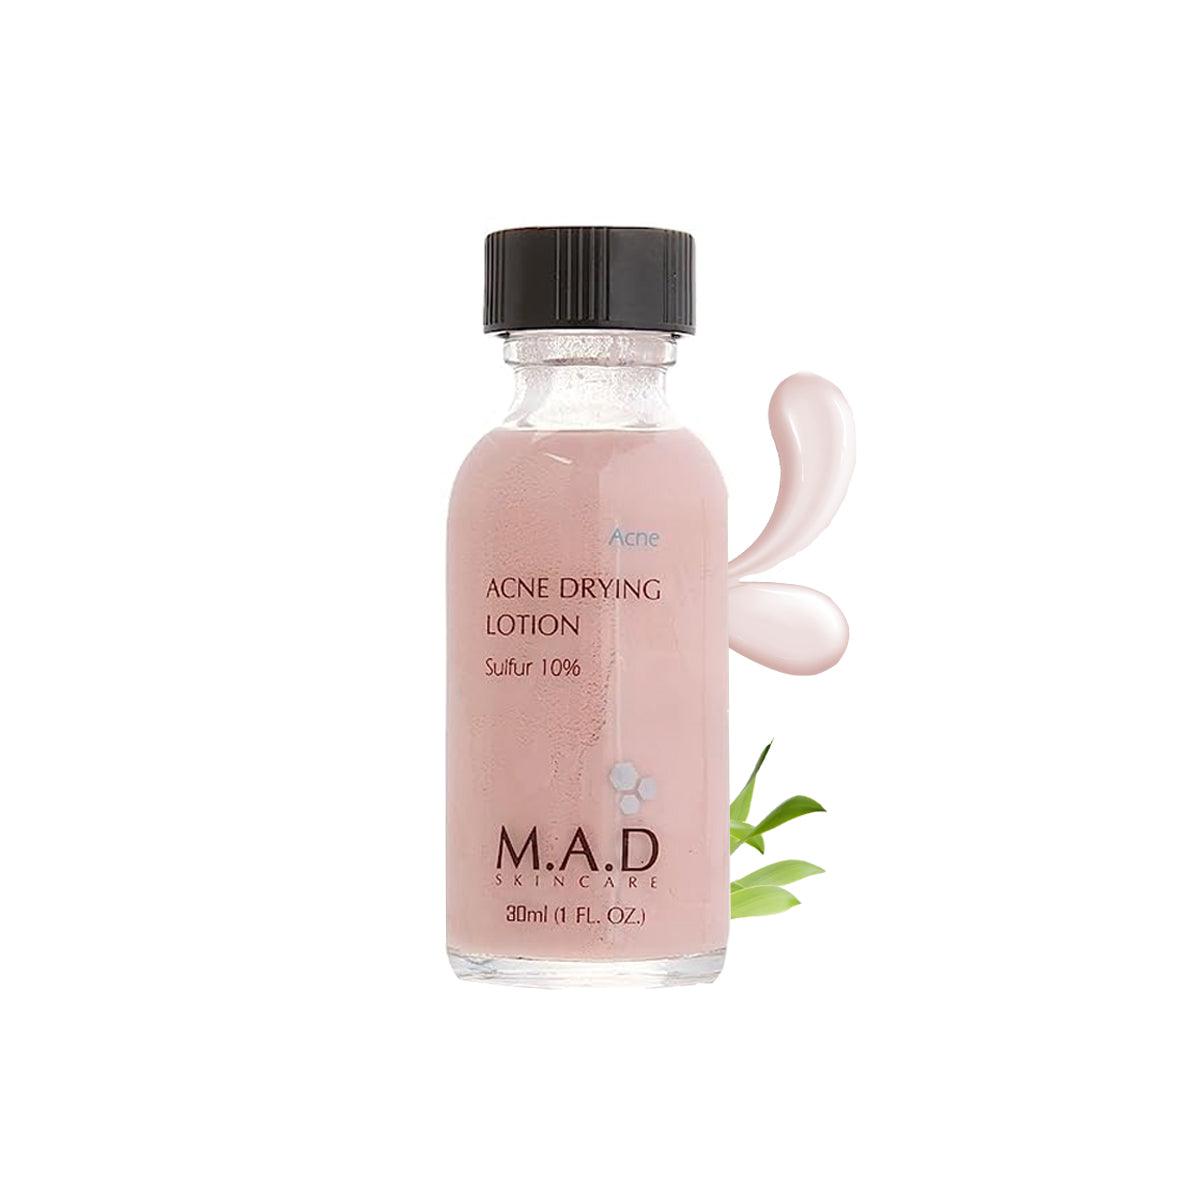 M.A.D Skincare Acne Drying Lotion Sulfur 10% 30 Ml - Zafir Medical Center